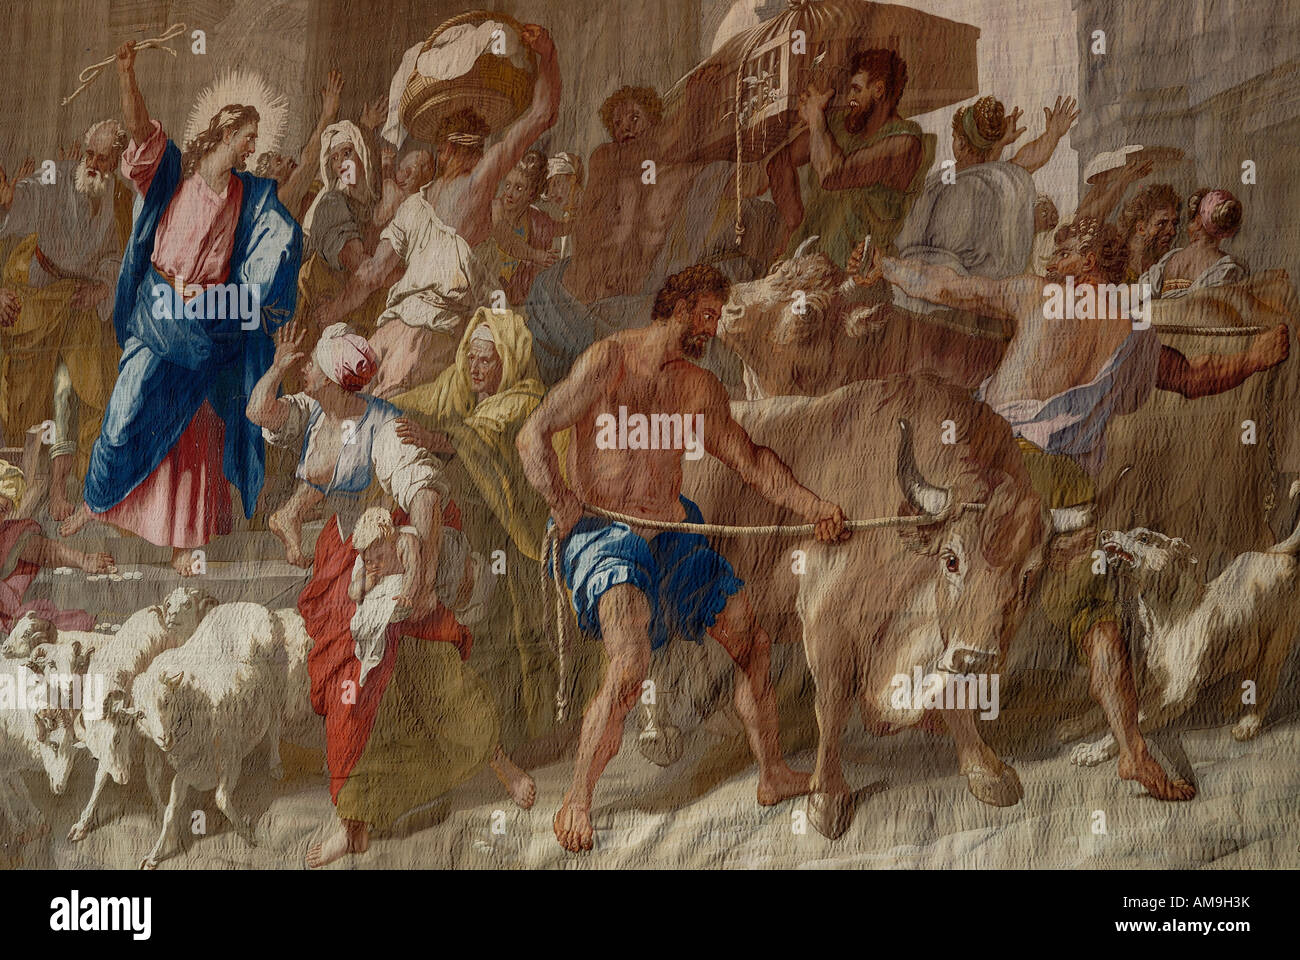 France, Paris, Les Gobelins, tapestry by Jean Jouvenet in chapel, Christ driving out merchants of the Temple Stock Photo